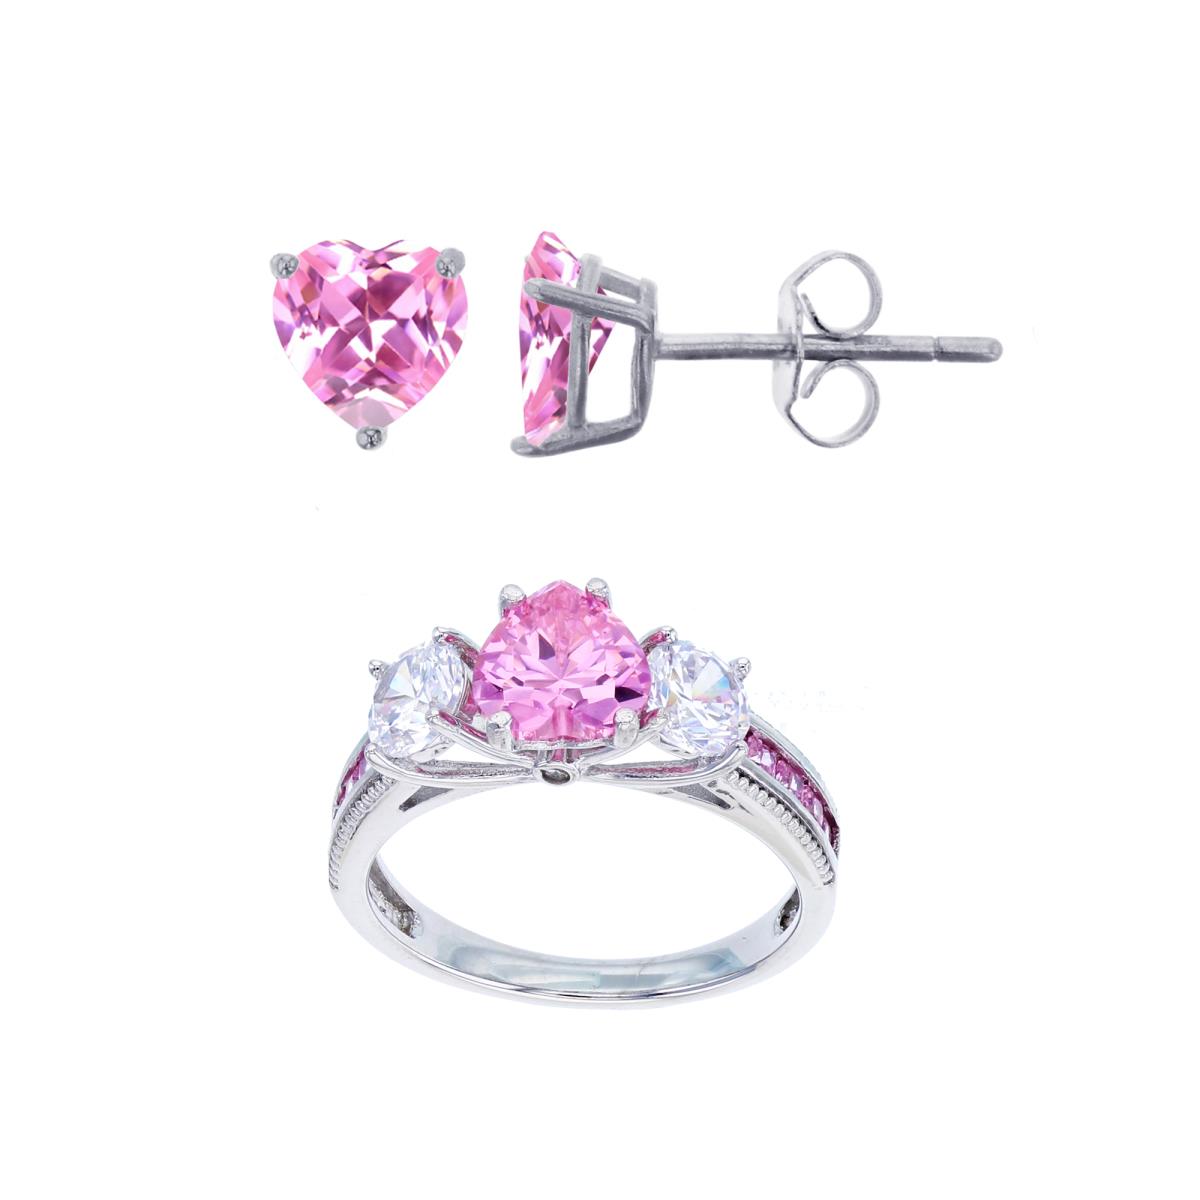 Sterling Silver Rhodium 3-Stone 7mm Pink Hrt & 5mm Rd CZ Ring & 6mm Pink Hrt Solitaire Stud Earring Set